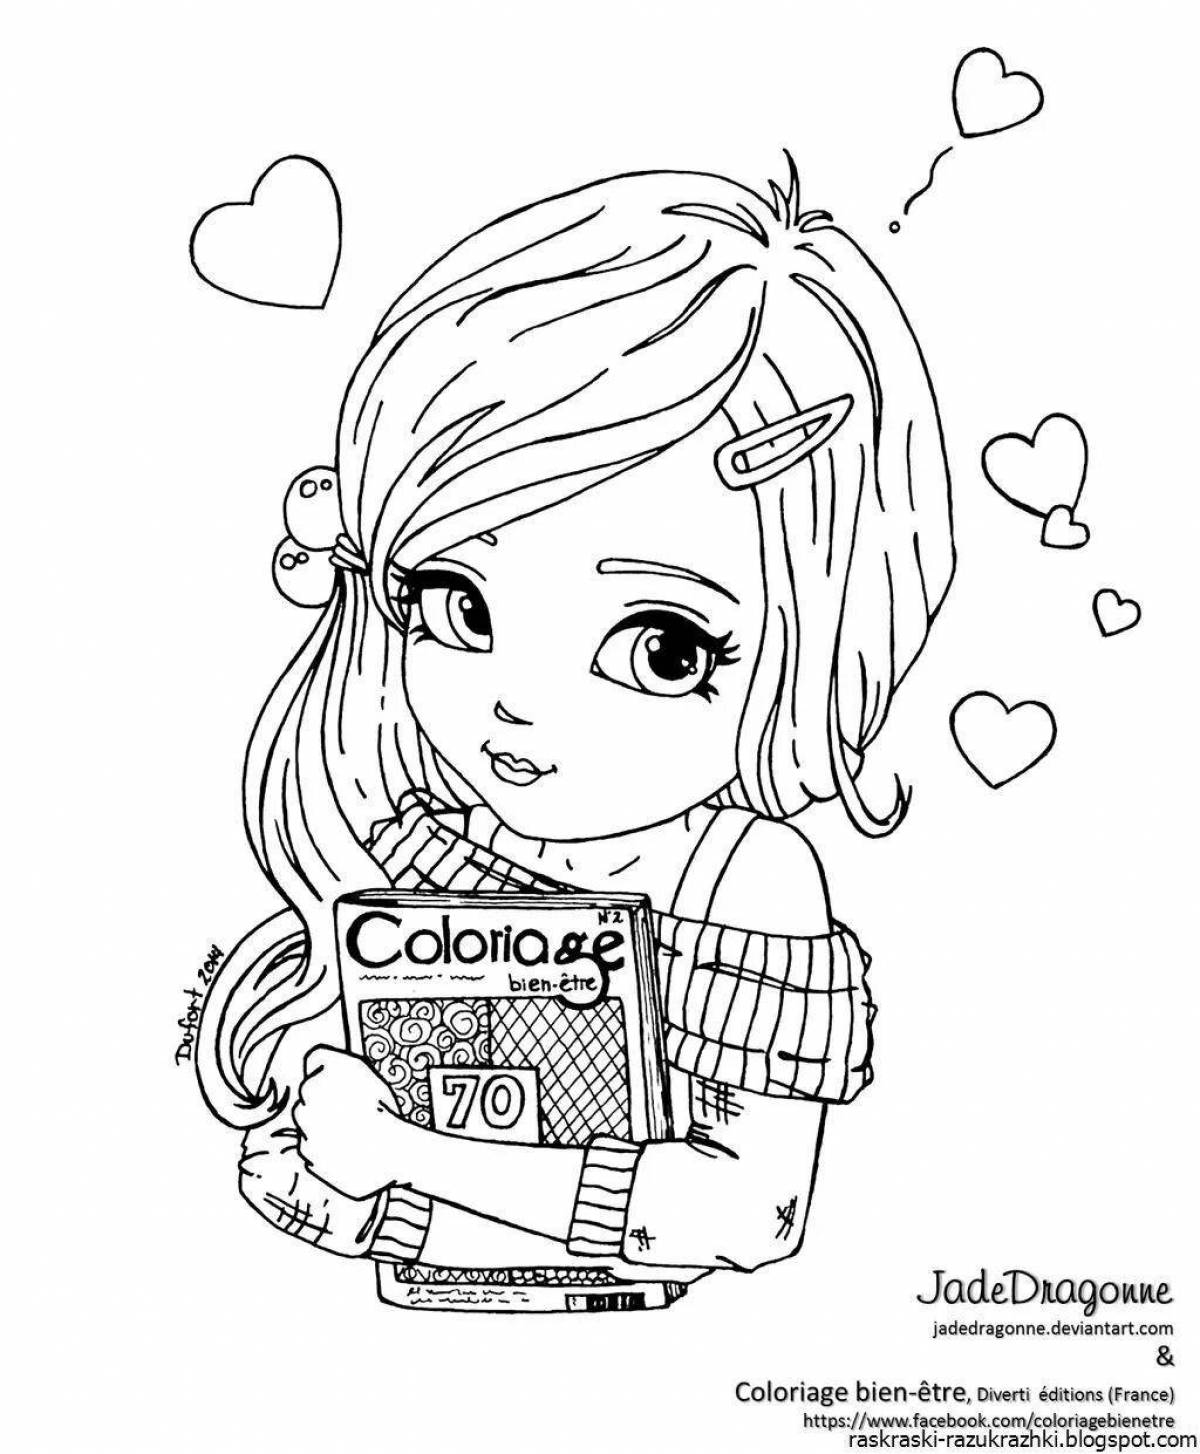 Animated coloring book for girls